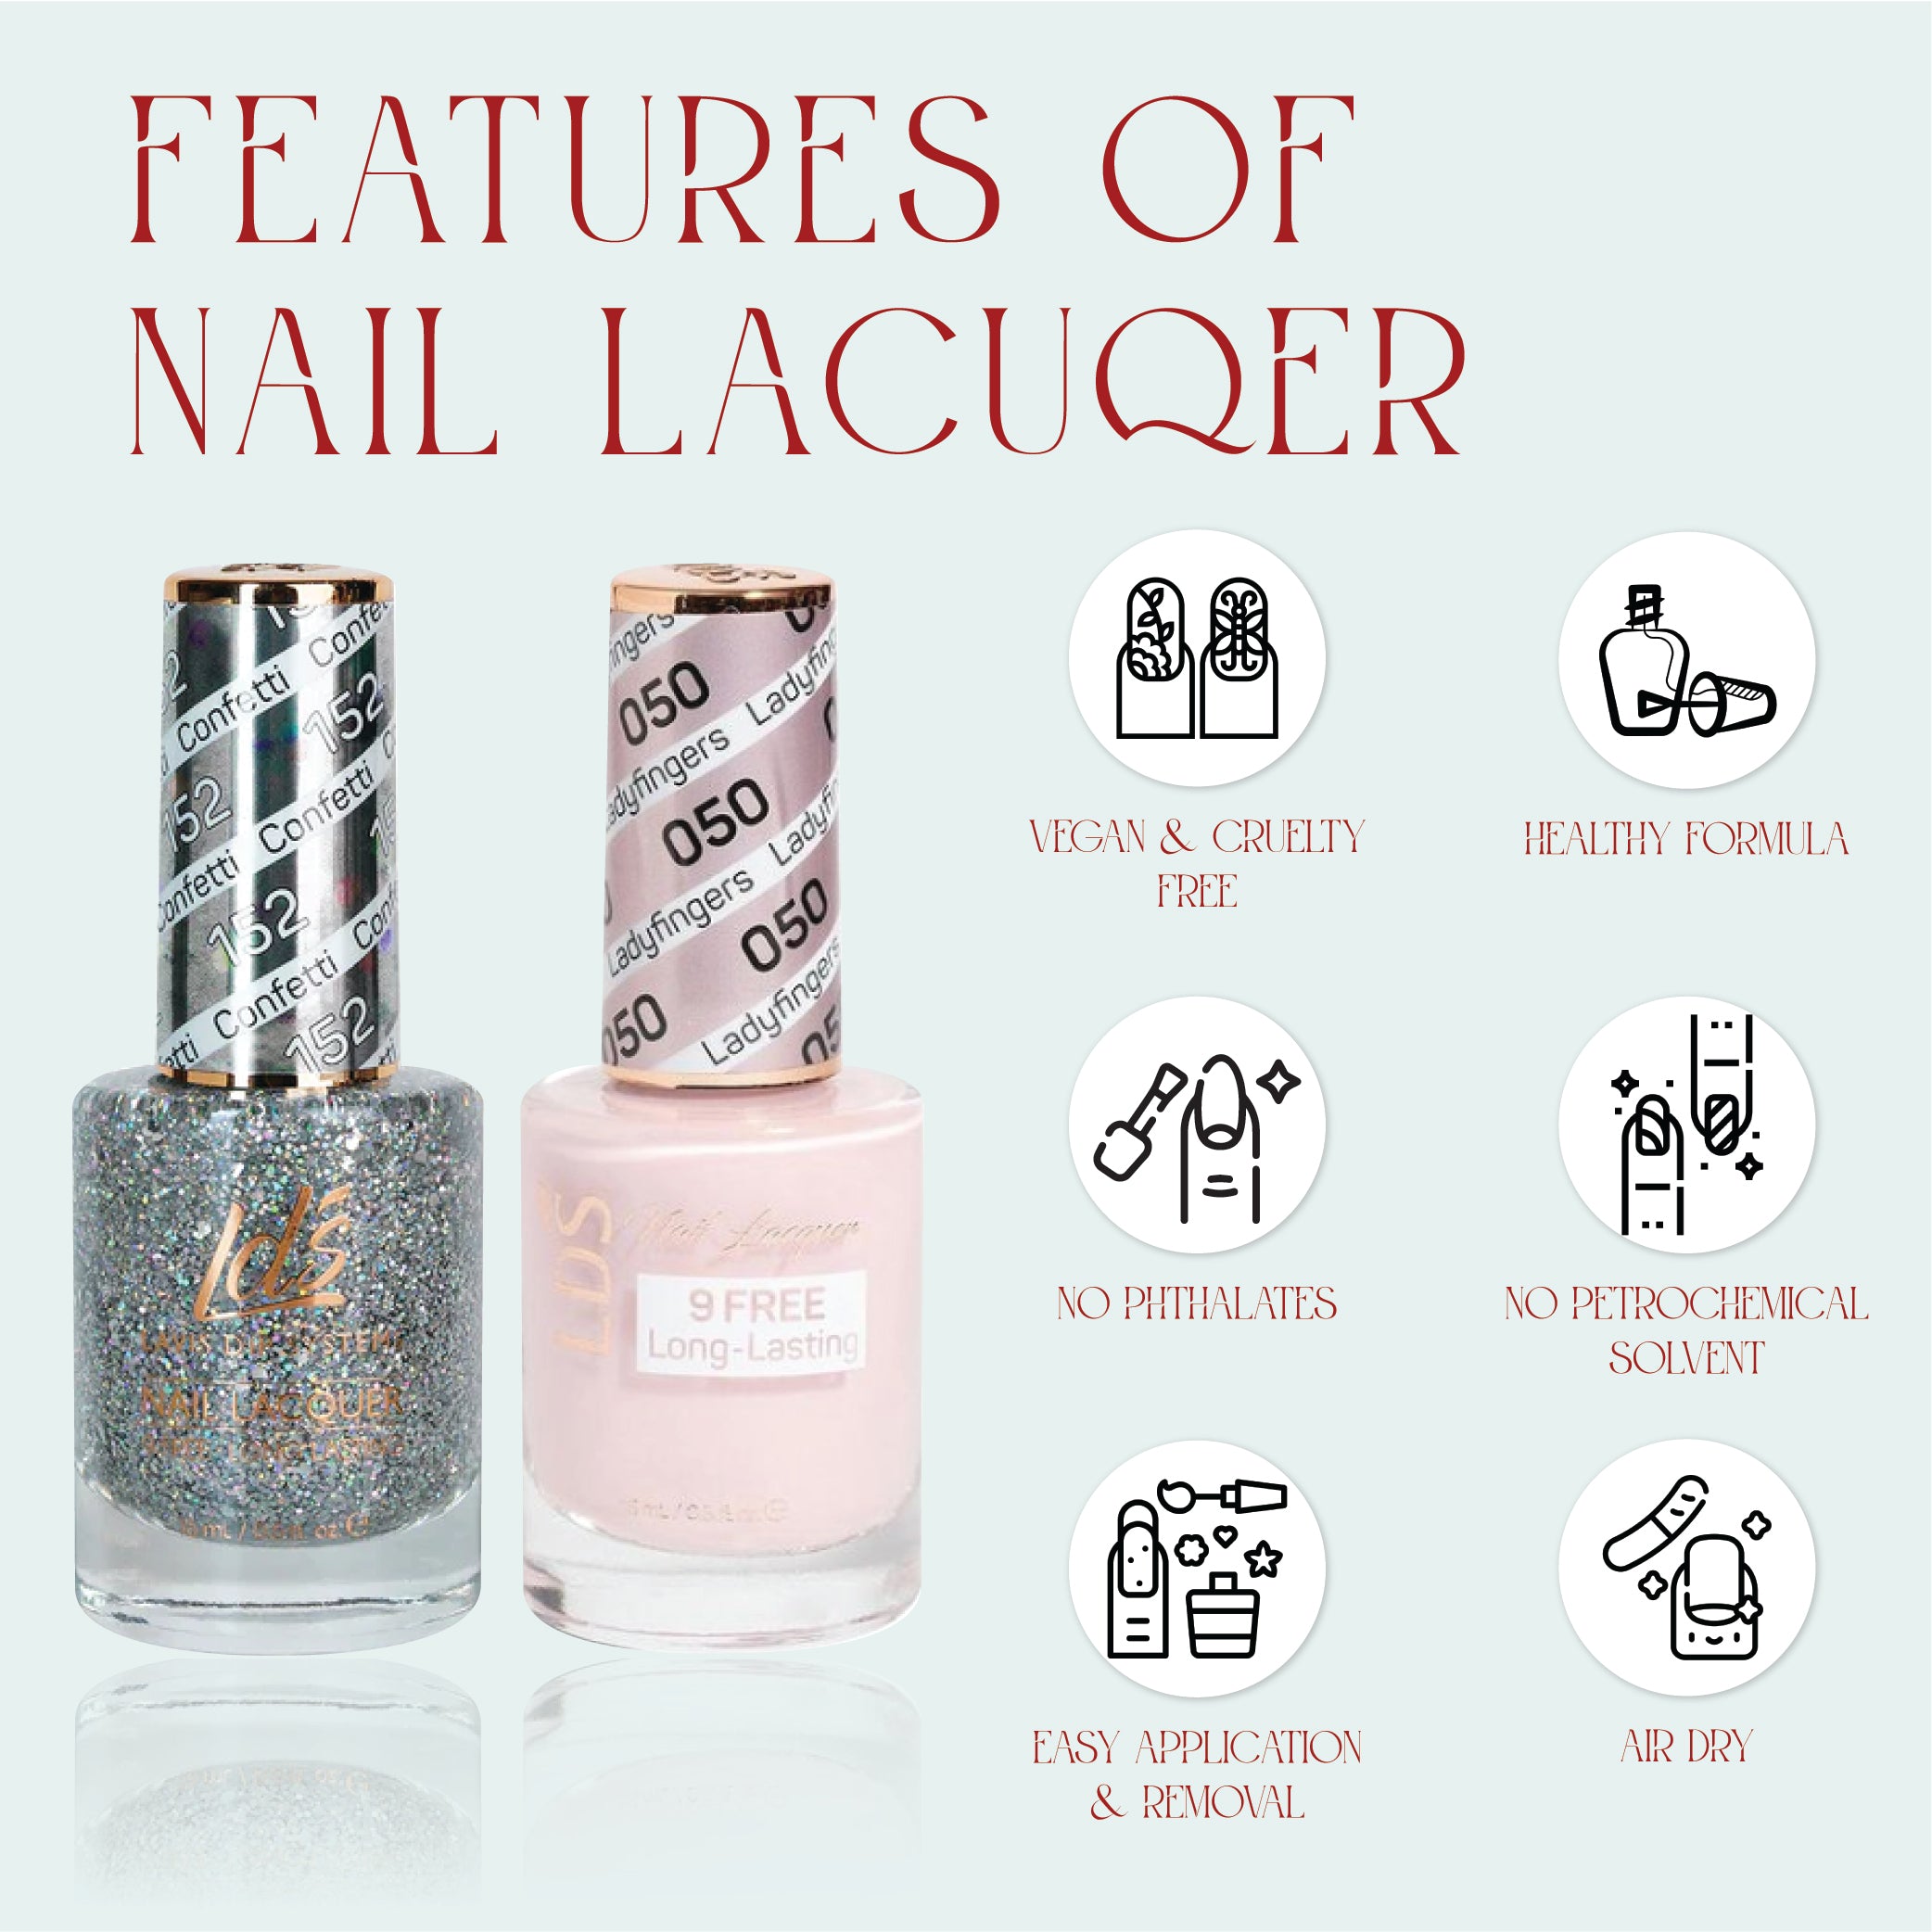 LDS Gel Nail Polish Duo - 153 Glitter, Gold Colors - Make Yourself A Priority